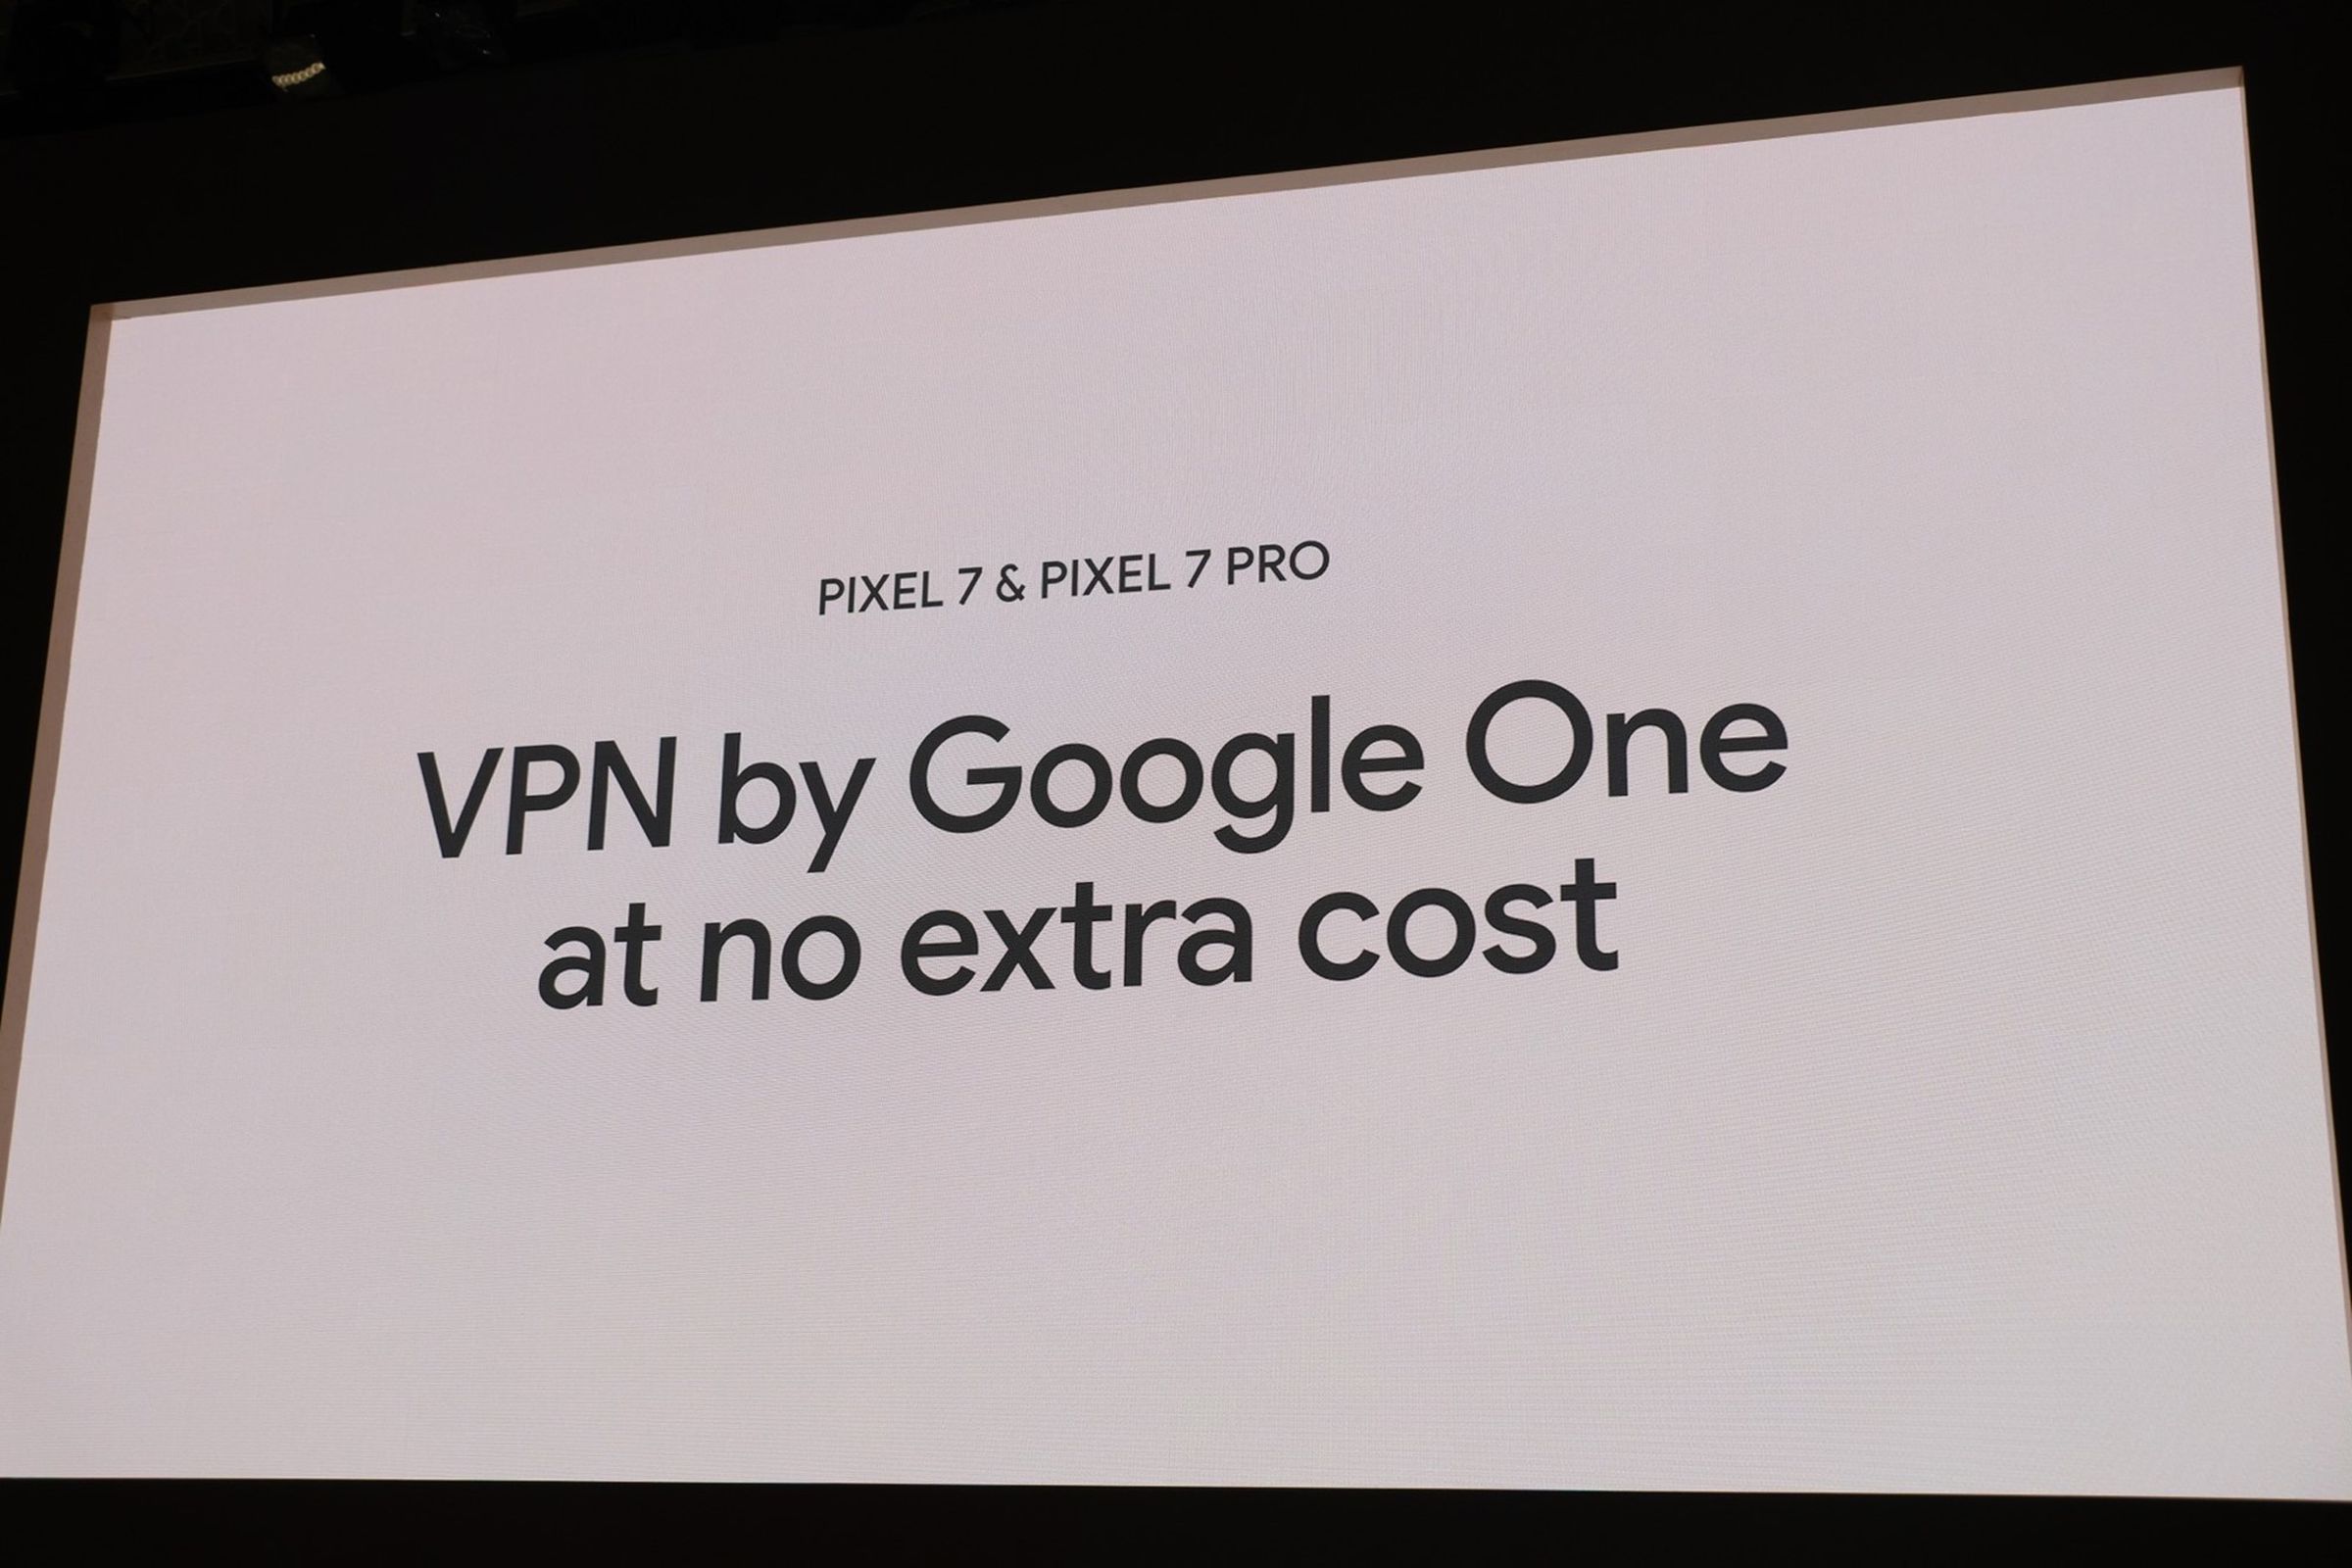 Image of a slide saying “Pixel 7 and Pixel 7 Pro VPN by Google One at no extra cost.”